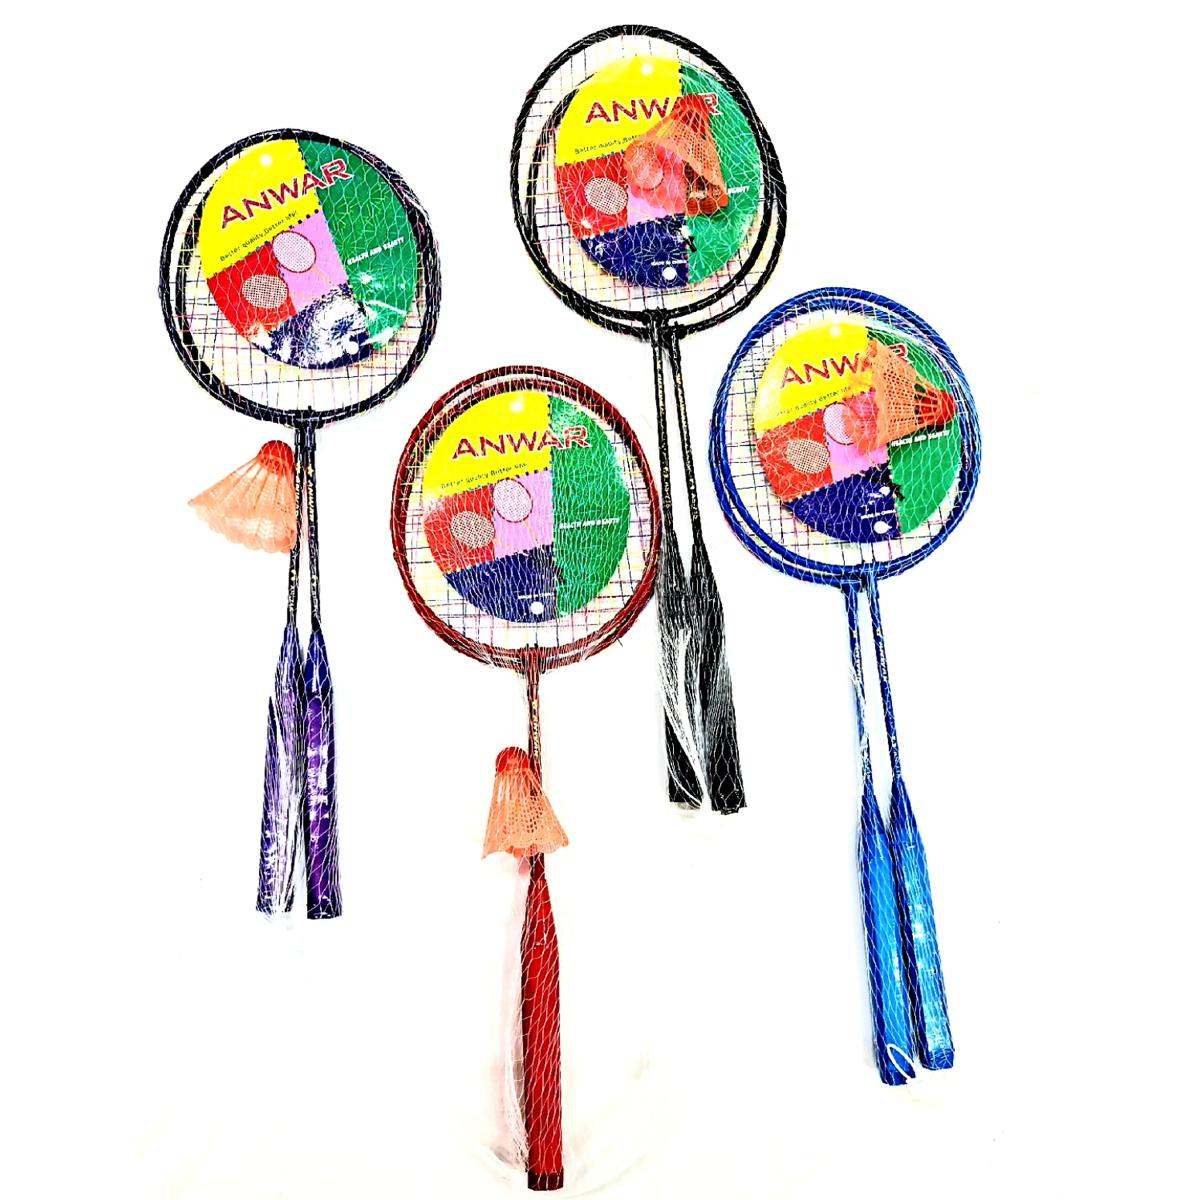 2 In 1 Baby Racket For kids